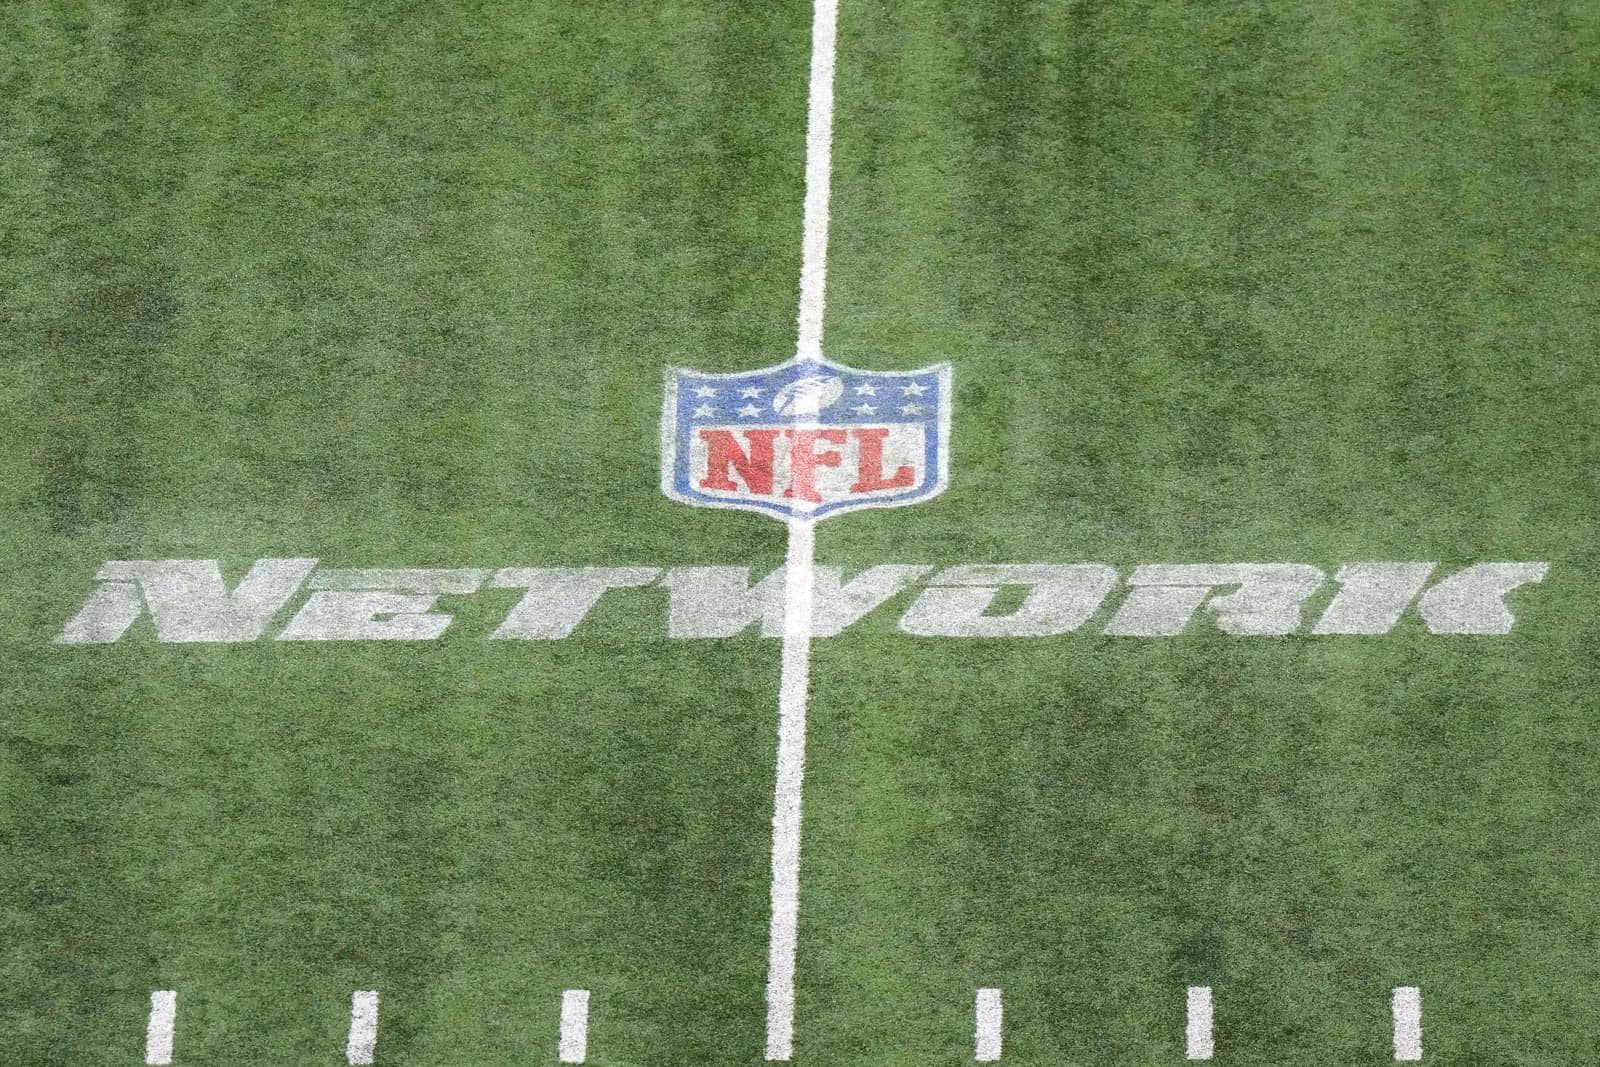 NFL Network to televise 23 live preseason games in 2023